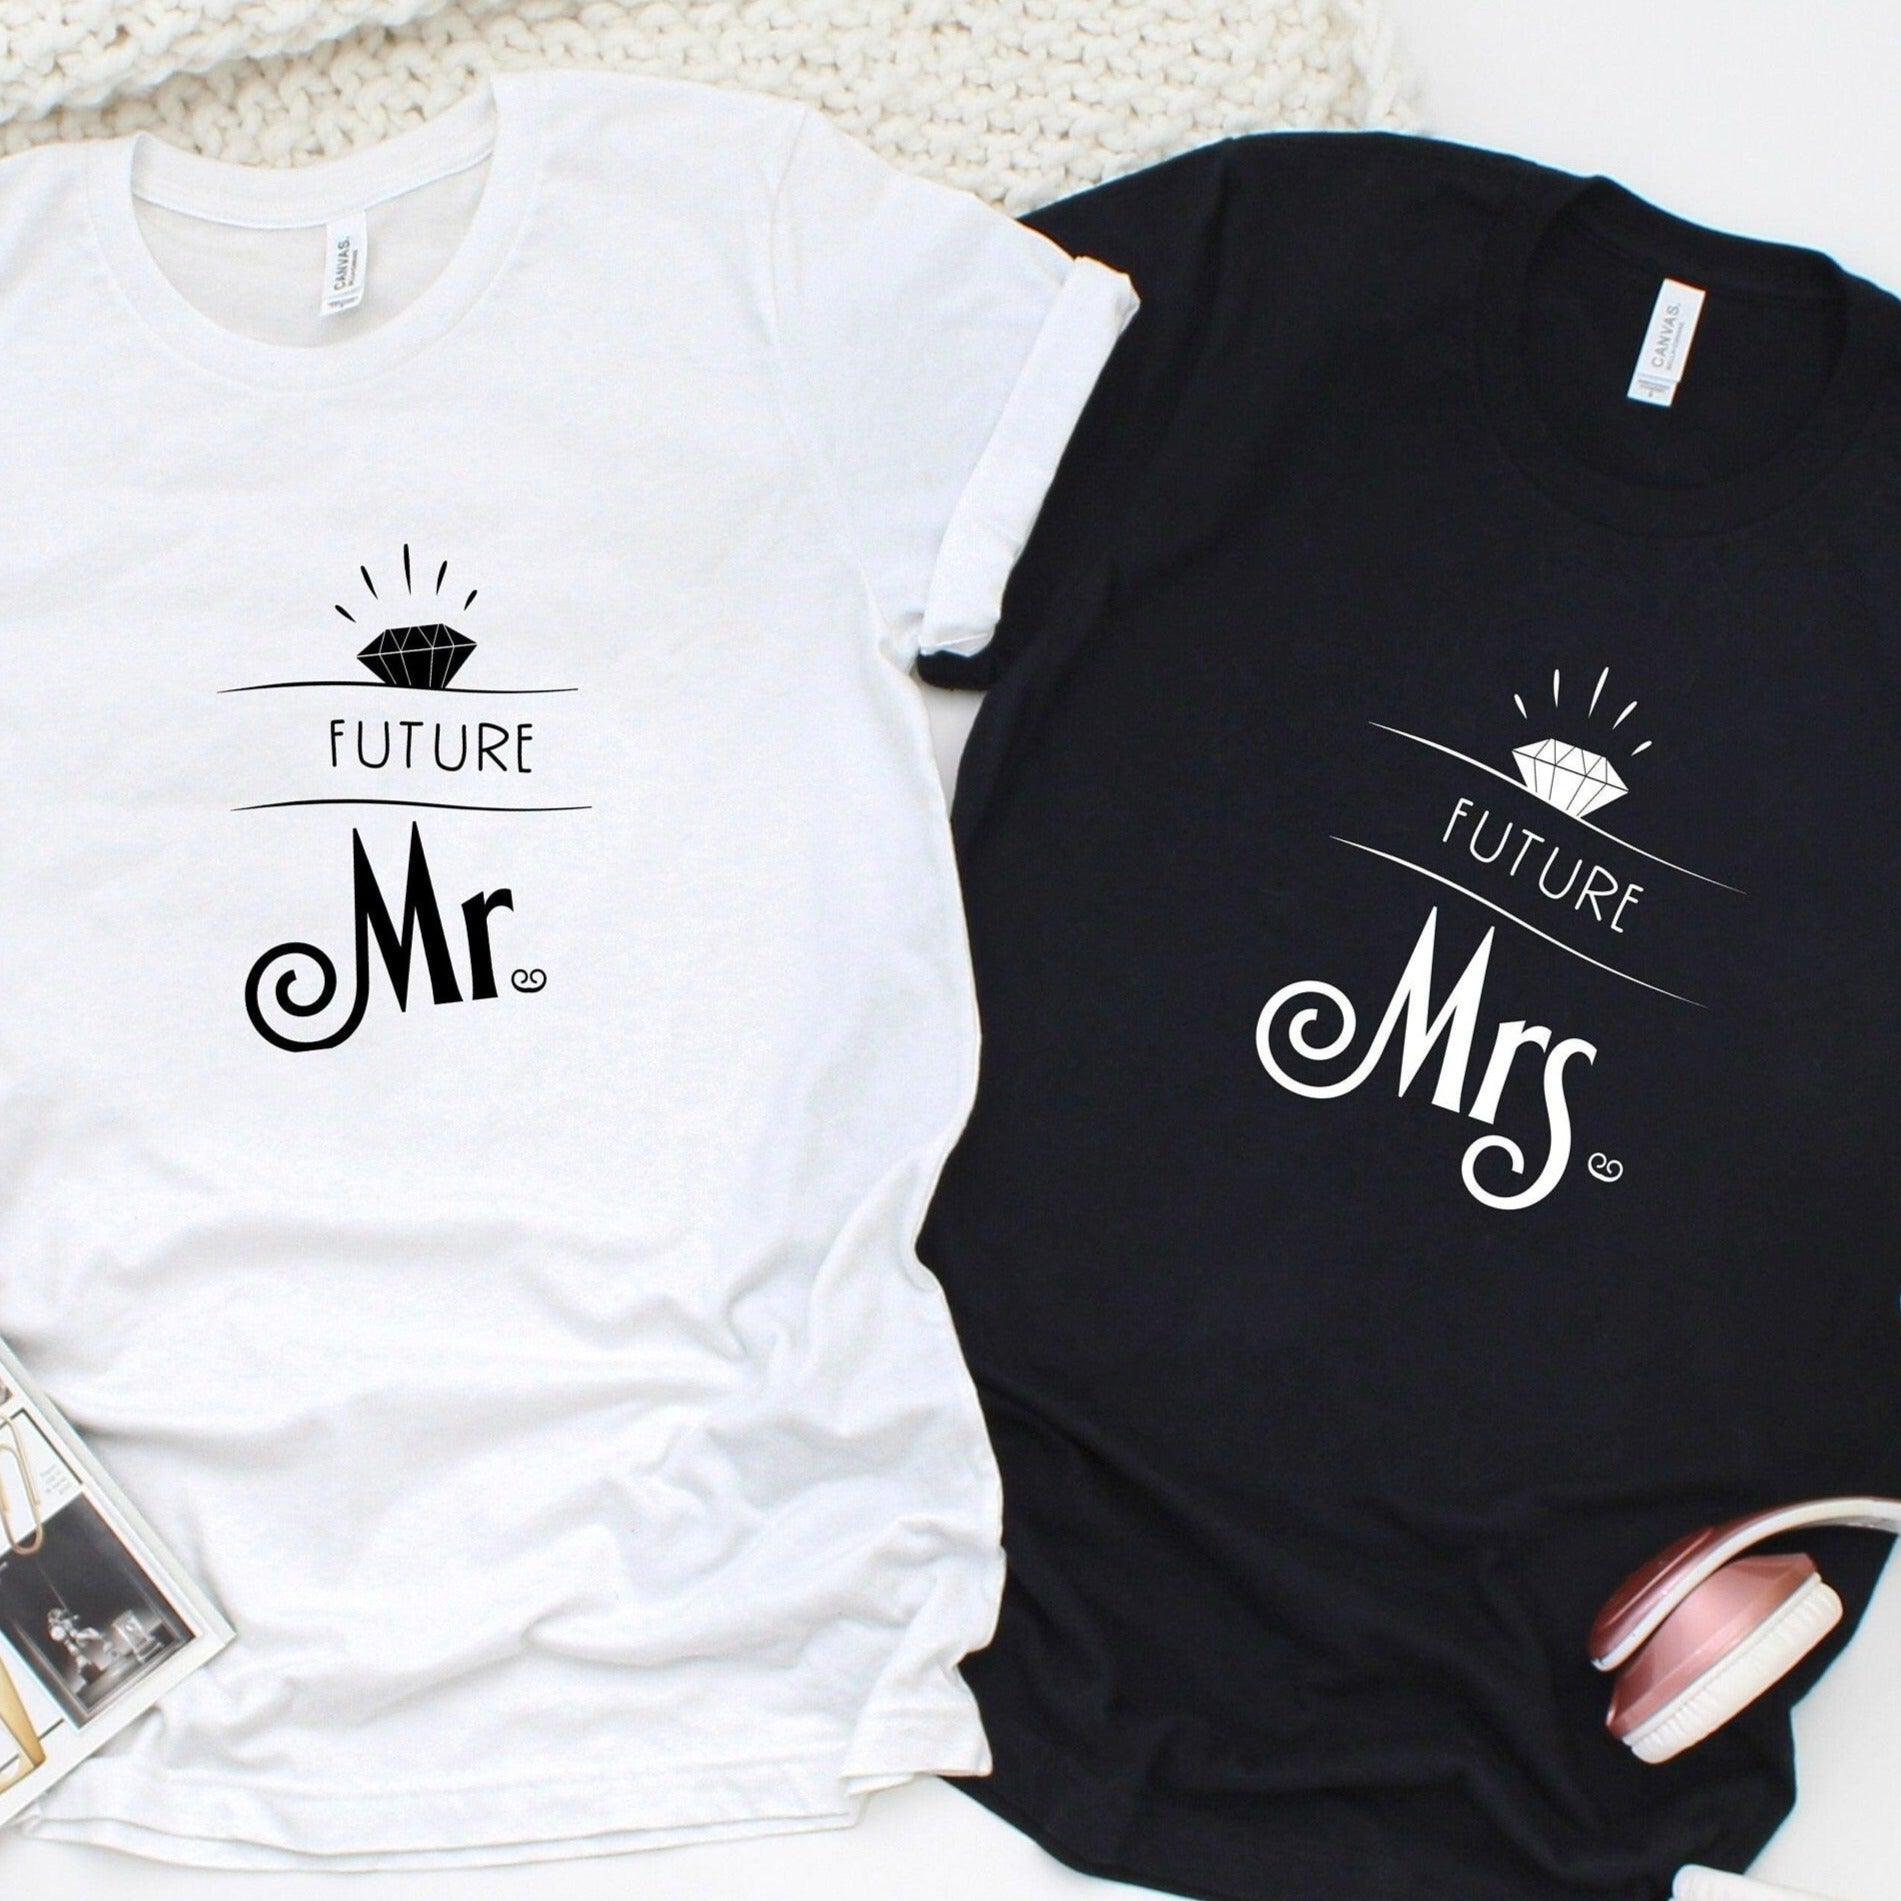 Future Mr & Mrs Matching Set: Ideal Valentine's Day Surprise for Loving Couples - 4Lovebirds